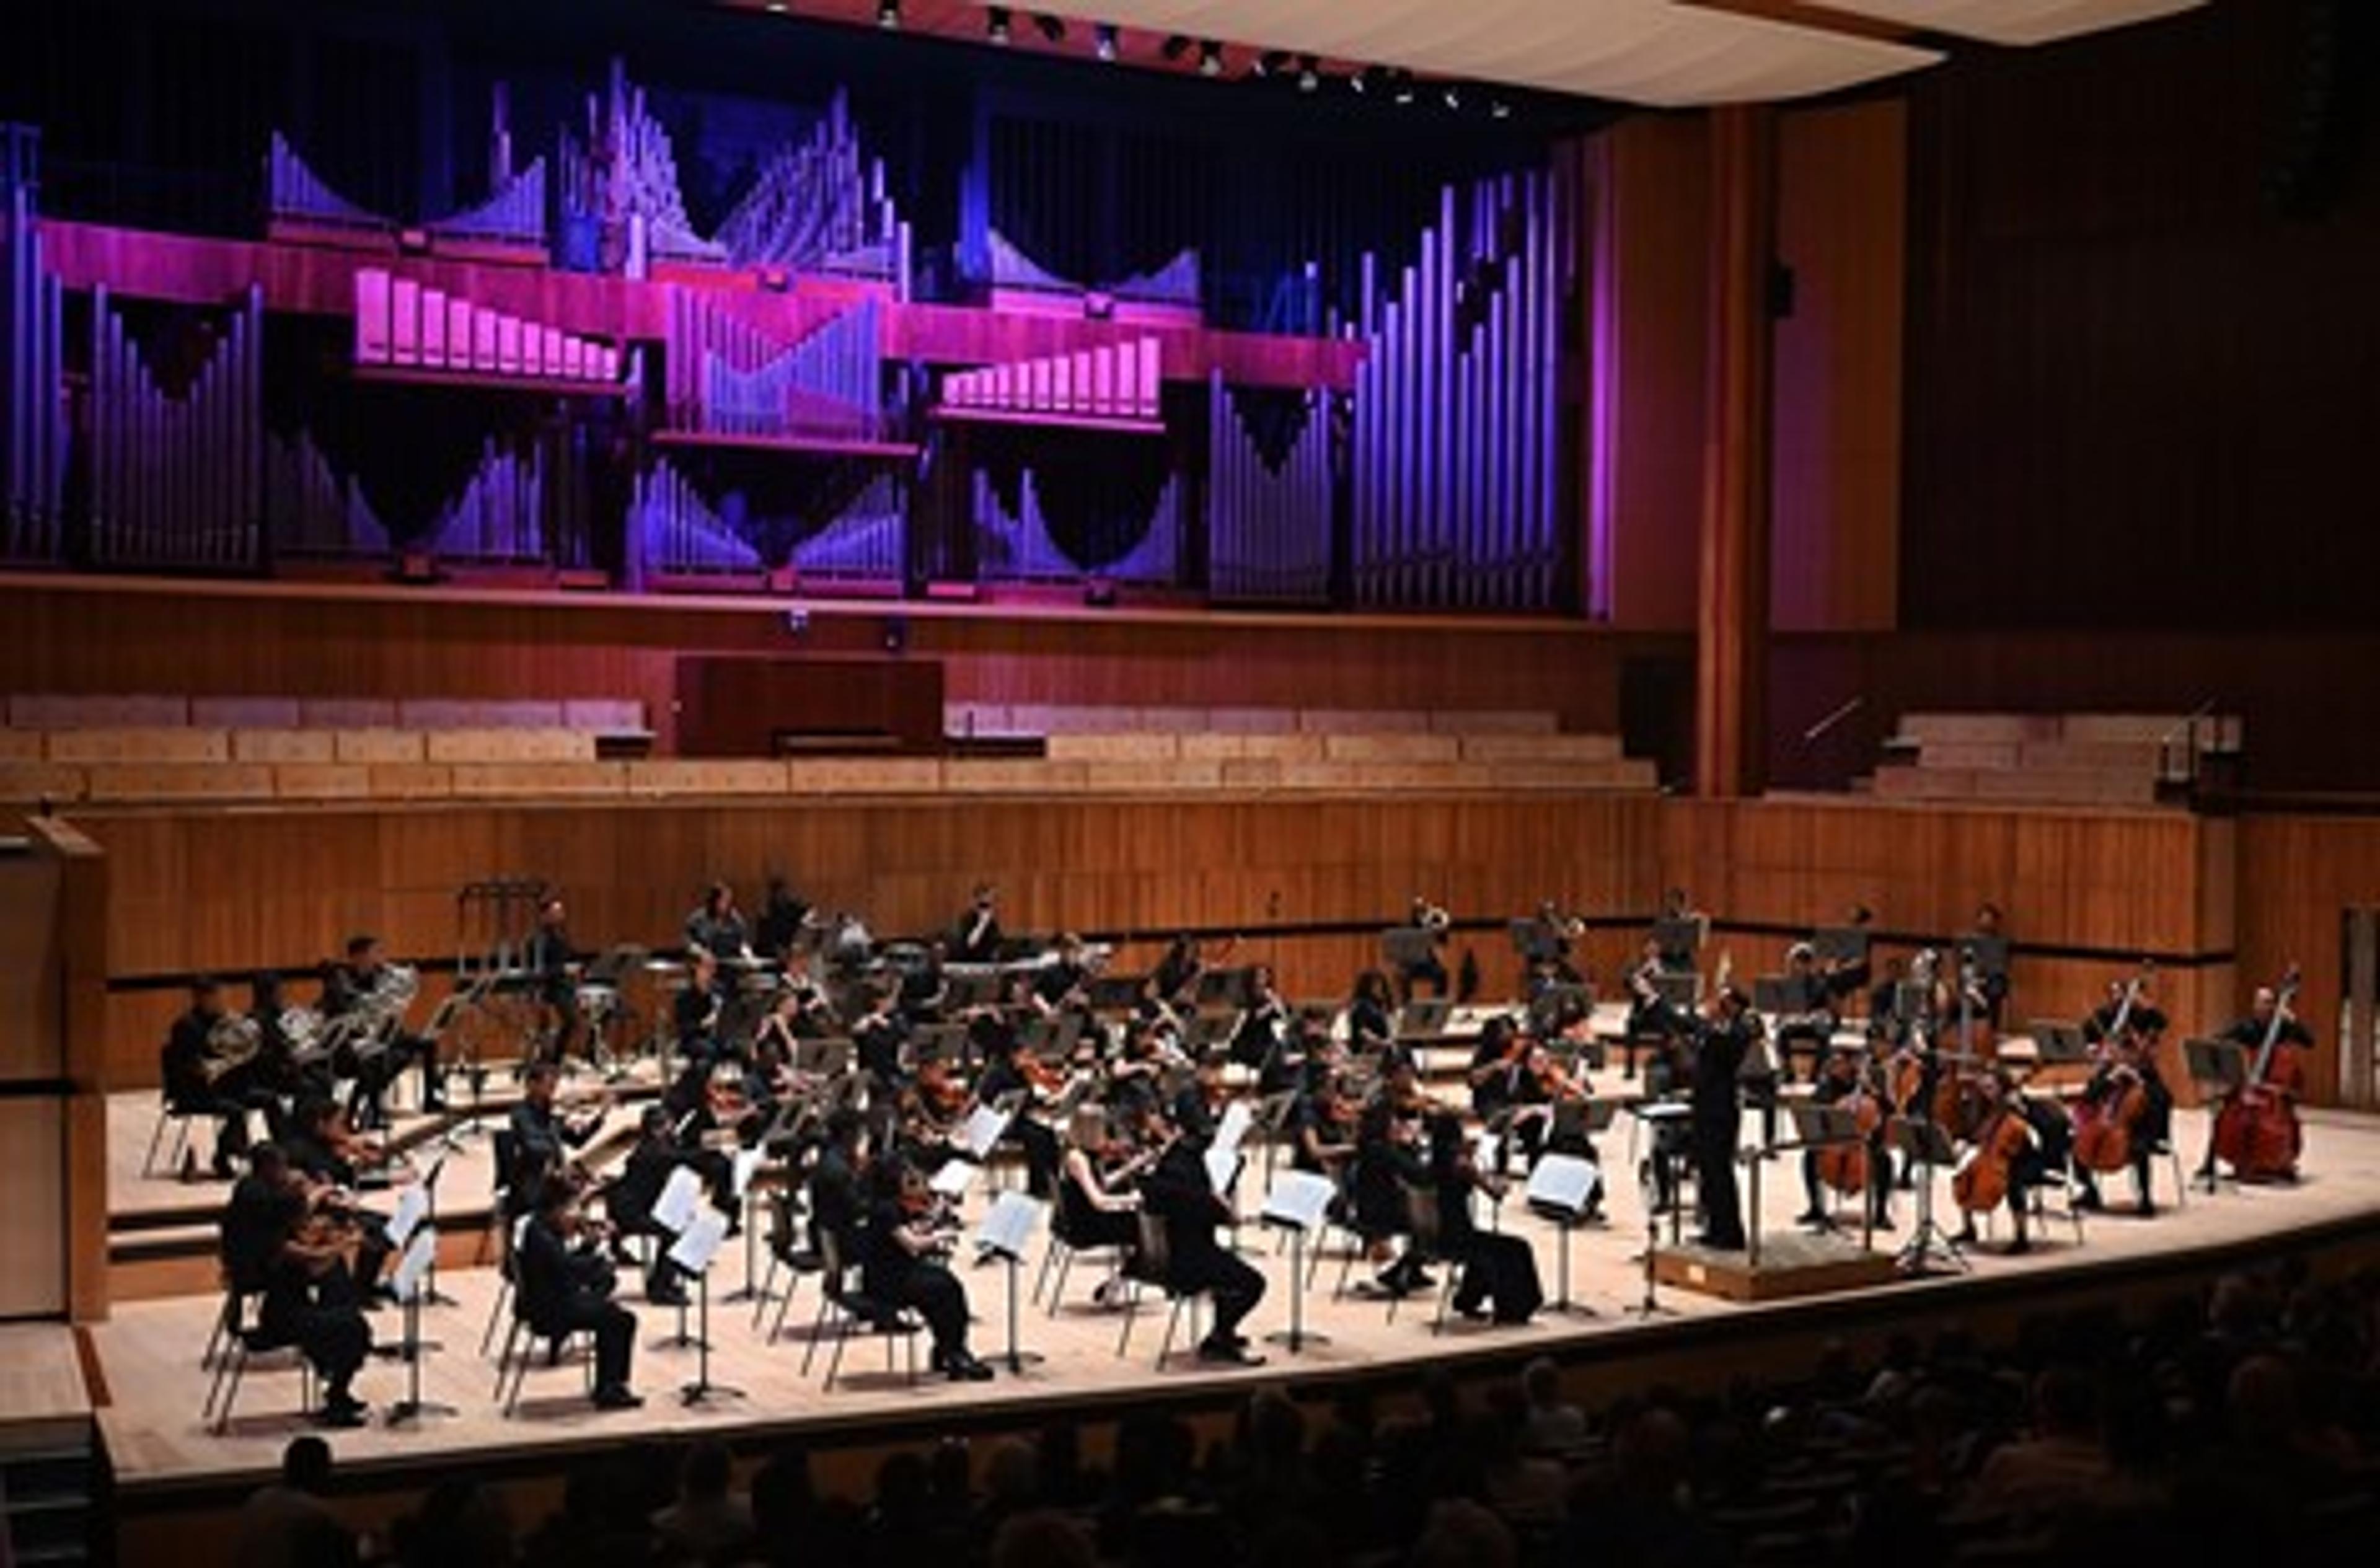 Chineke! Junior Orchestra playing on stage at the Royal Festival Hall